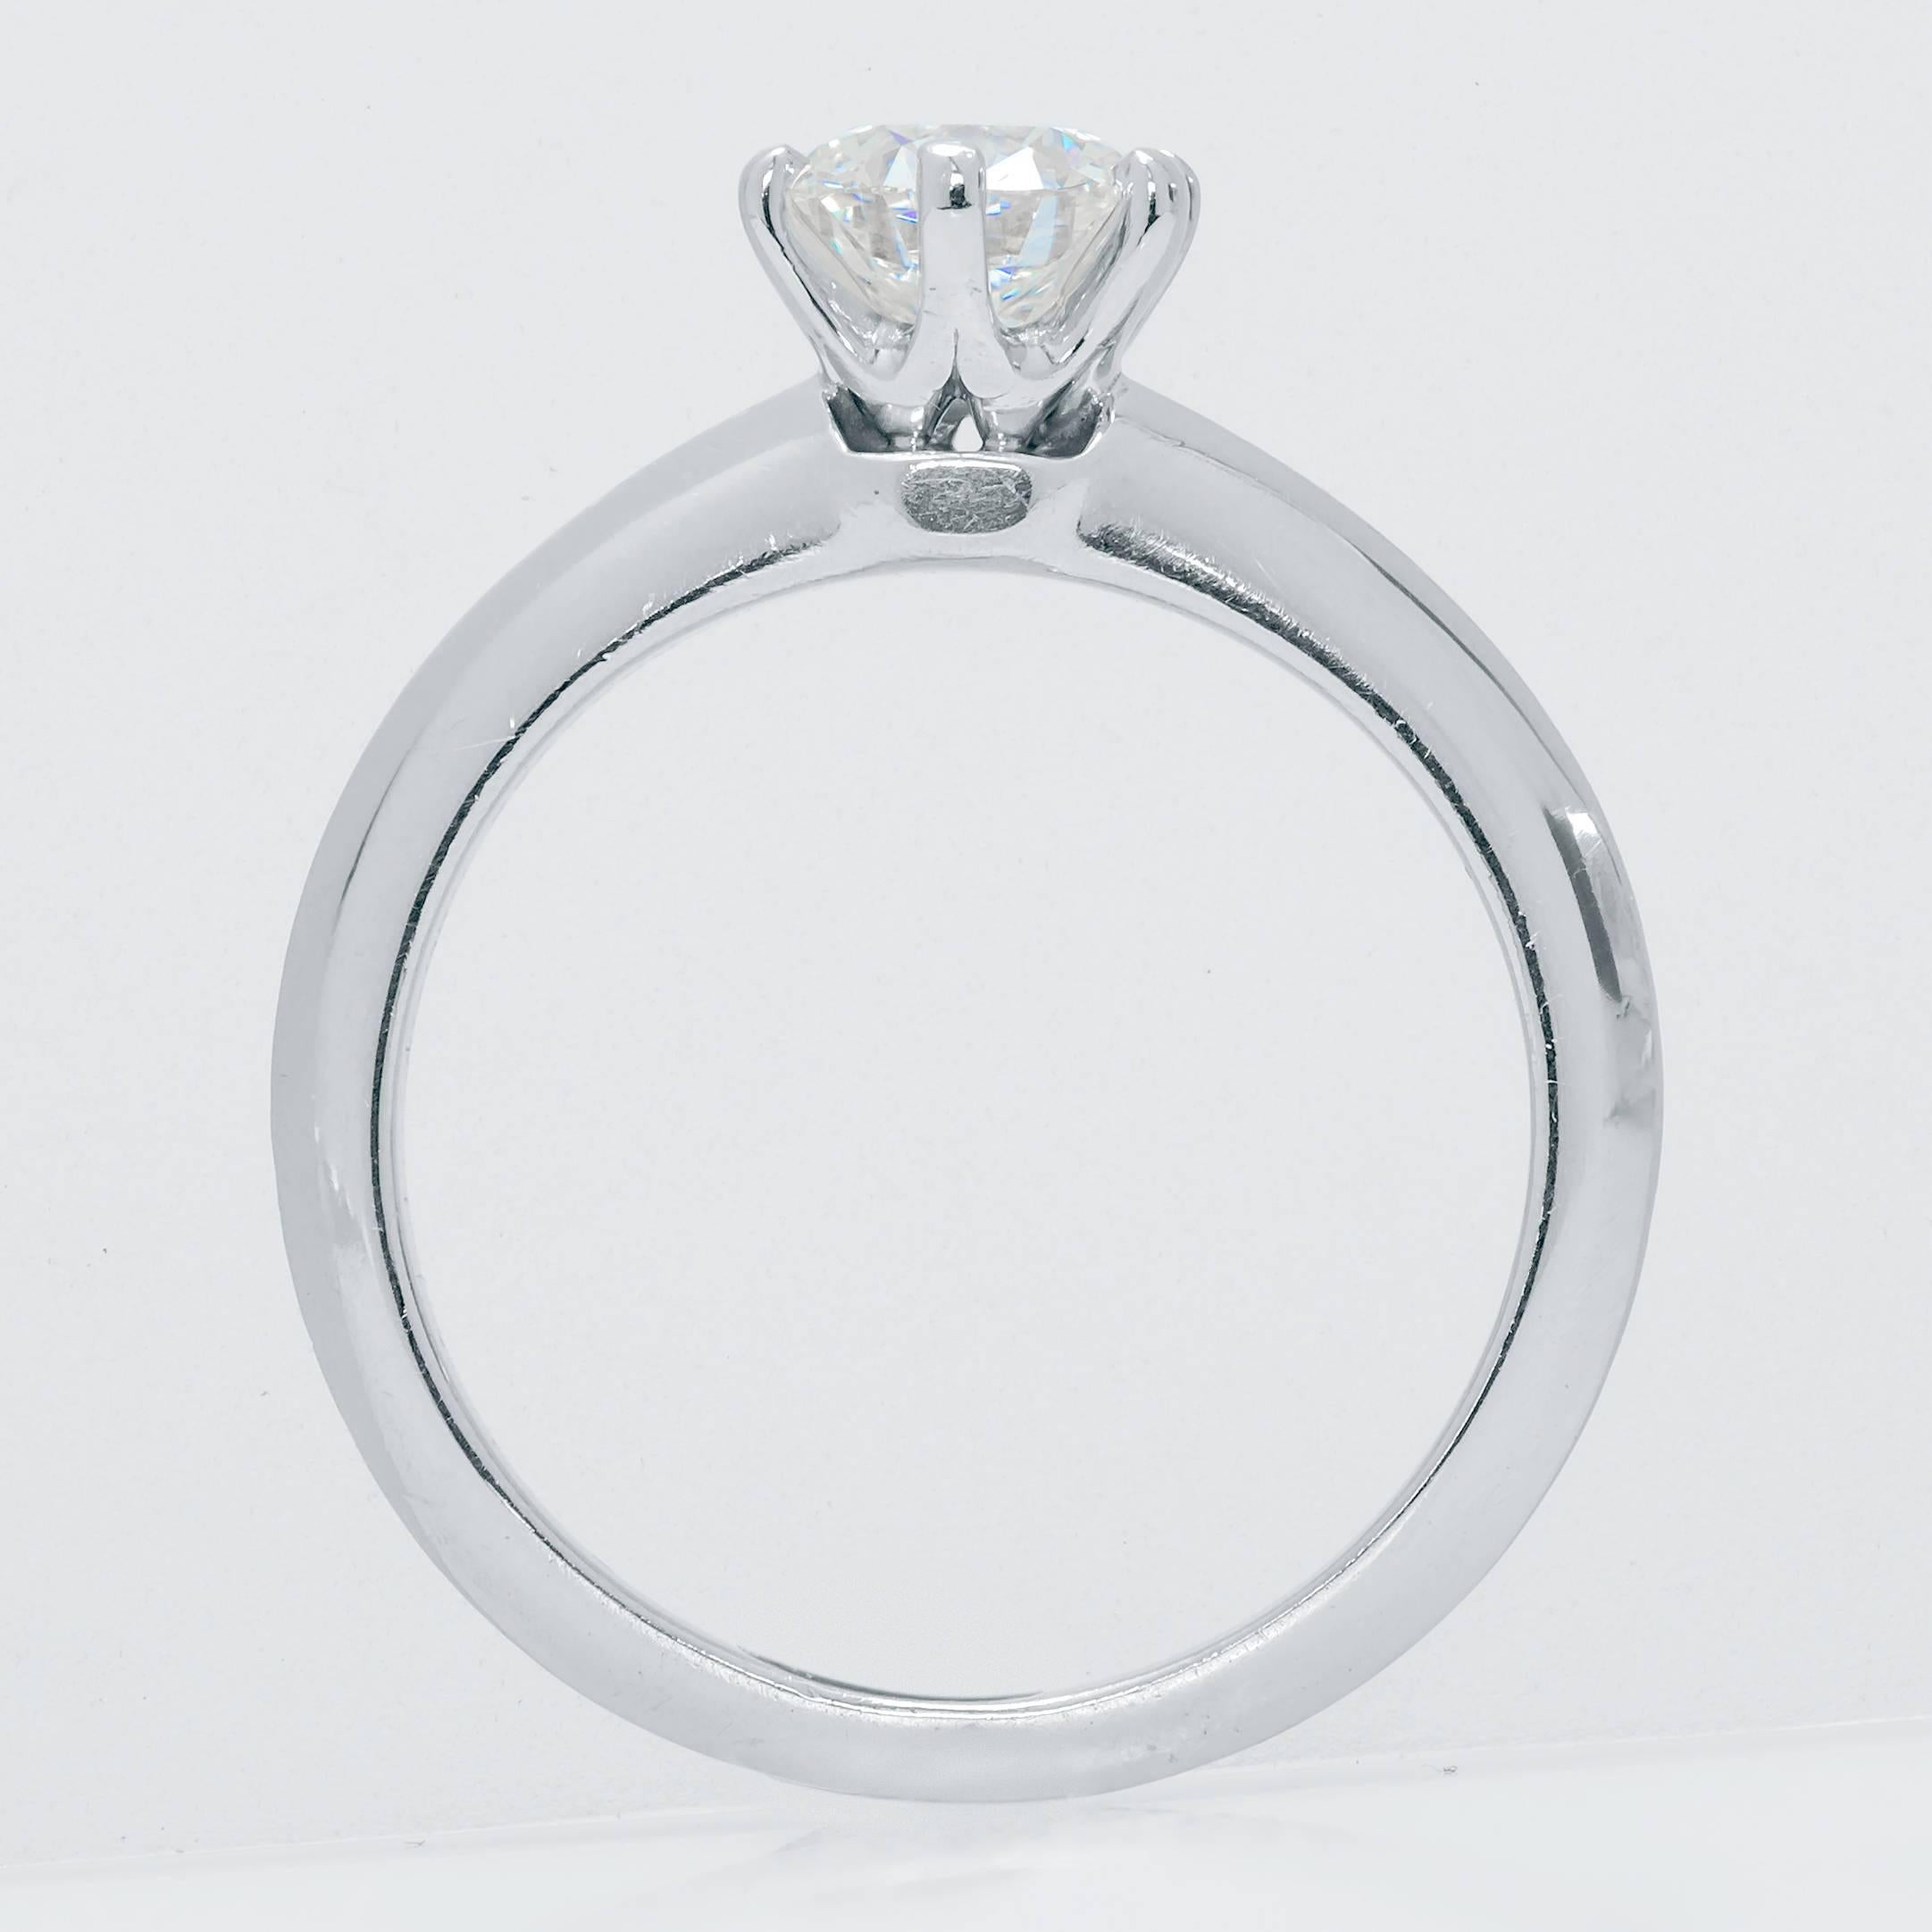 This Tiffany & Co. platinum solitaire ring is set with a 0.66ct round IVS1 diamond.  The ring fits finger size 4.5.  The platinum band has minor wear consistent with age that doesn't take away from the beauty of the piece.

This ring will come